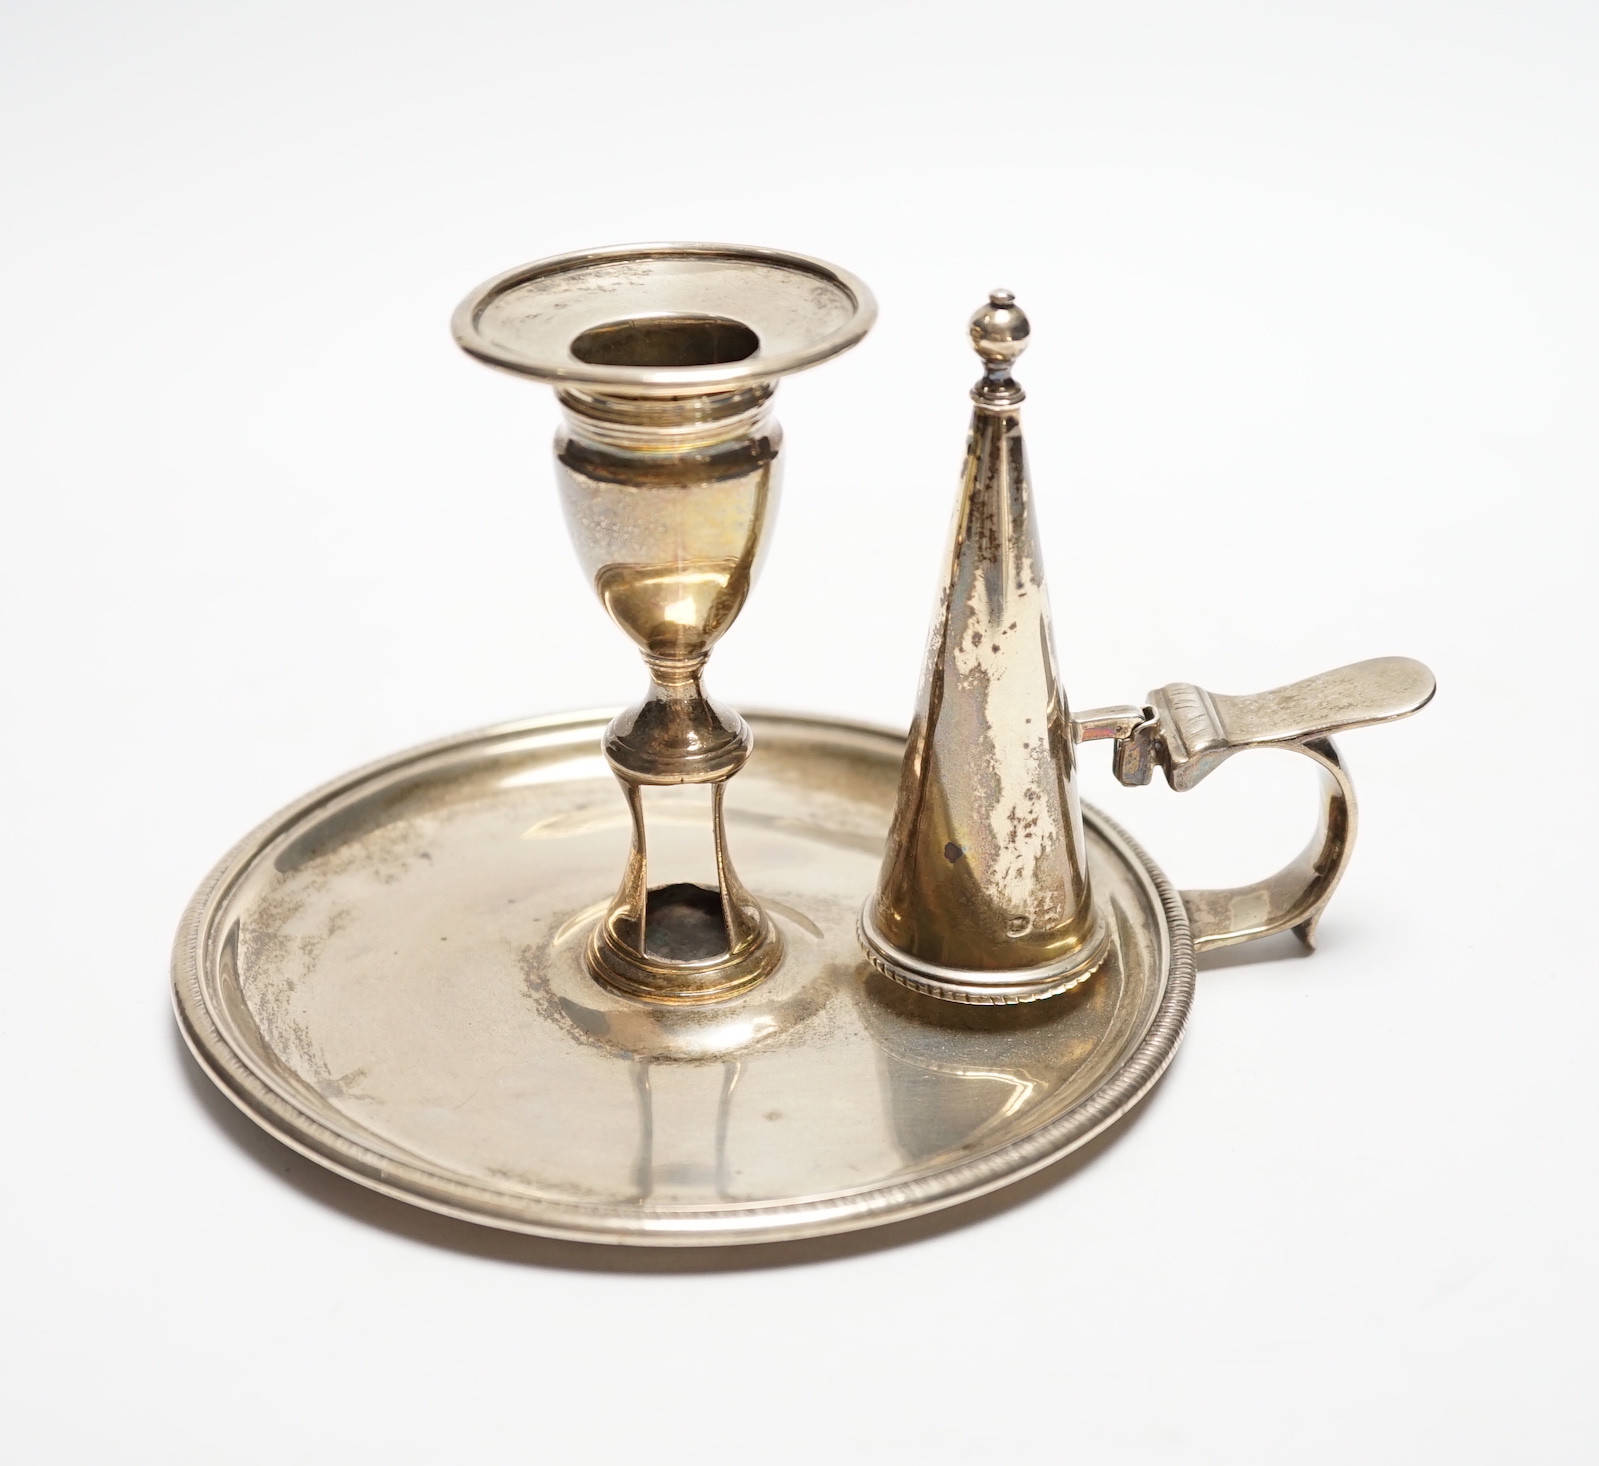 A George III silver chamberstick, John Mewburn, London, 1801, with extinguisher(marks rubbed), diameter 13.7cm, 9.7oz.                                                                                                      